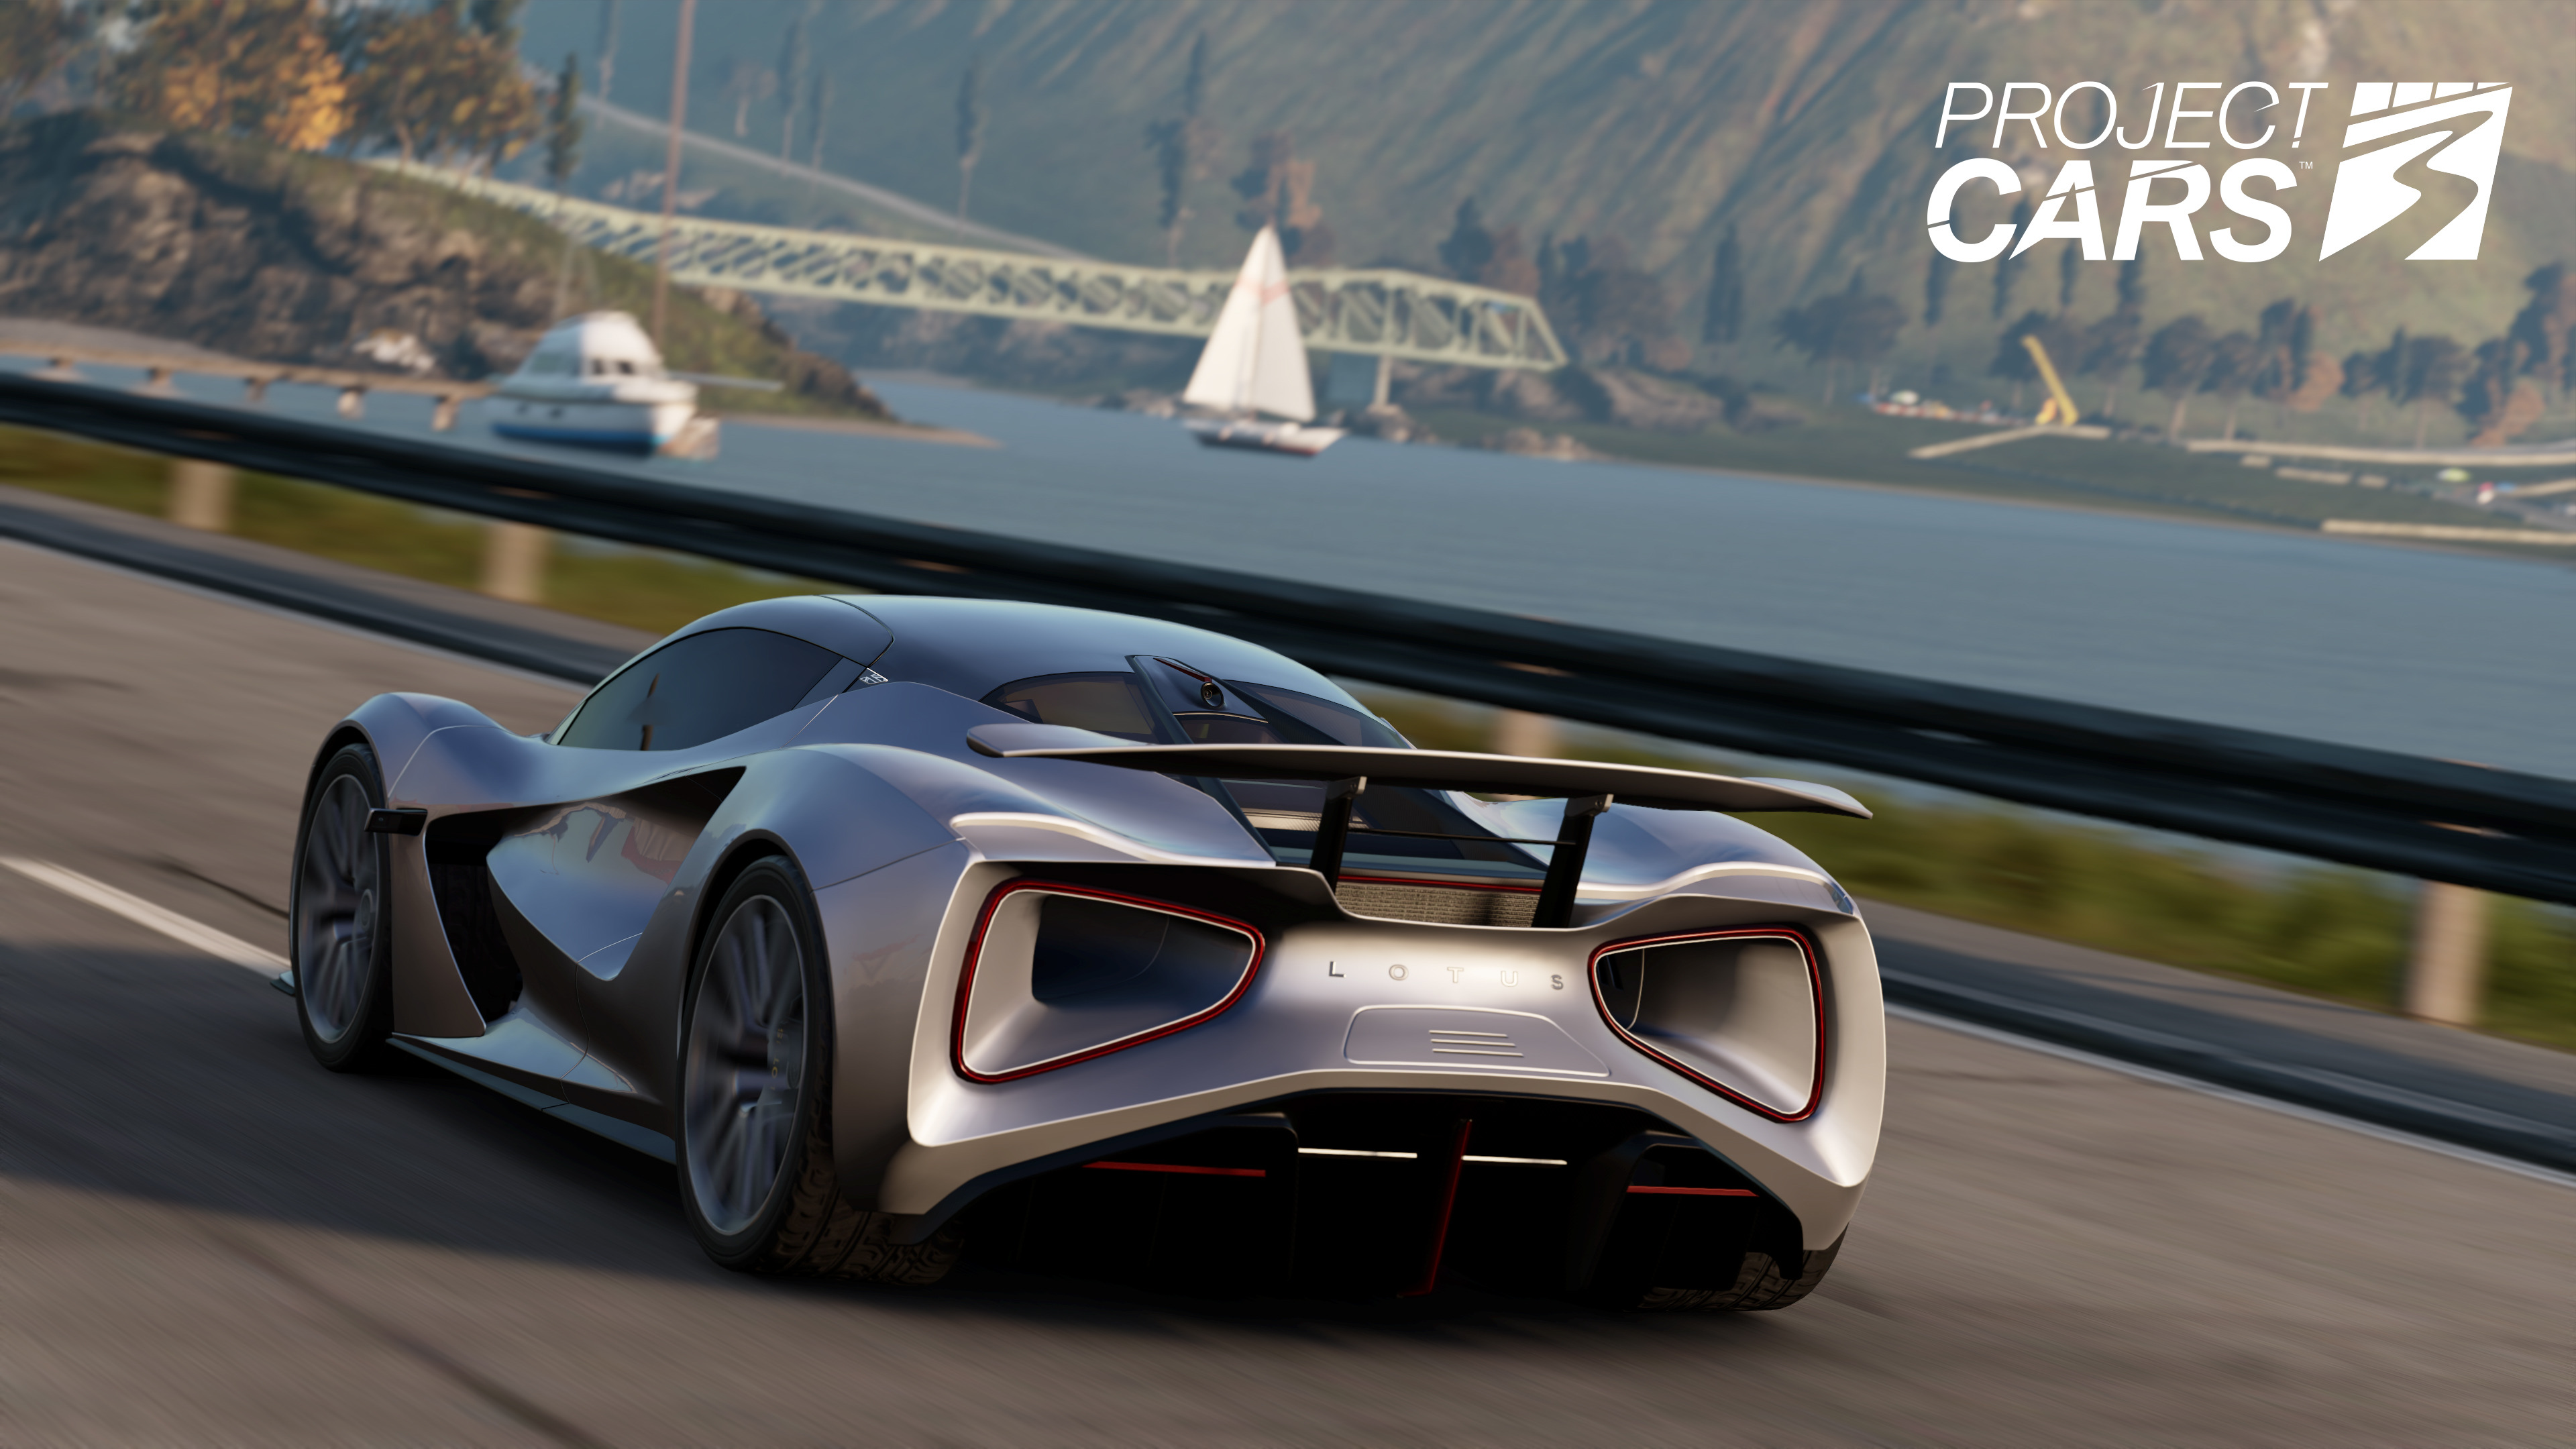 Video Game Project Cars 3 4k Ultra HD Wallpaper